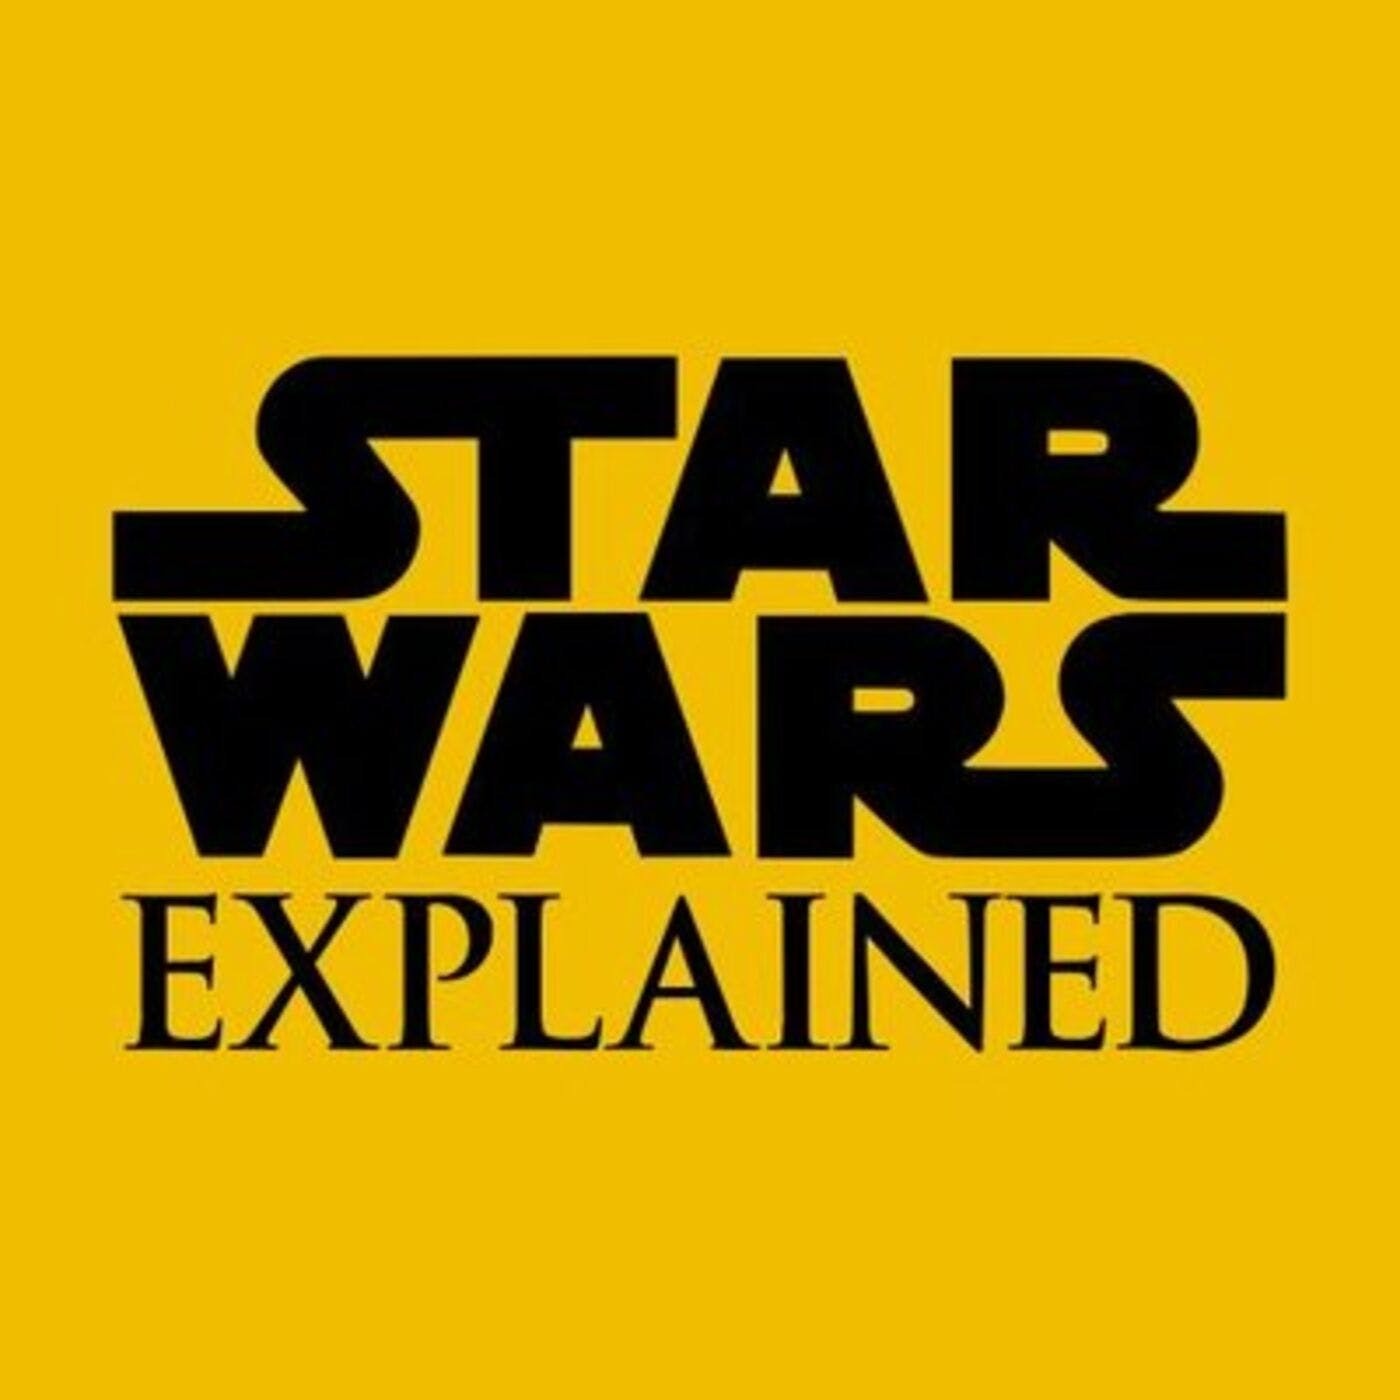 Does the Scooter Gang Fit in The Book of Boba Fett - Star Wars Explained Weekly Q&A